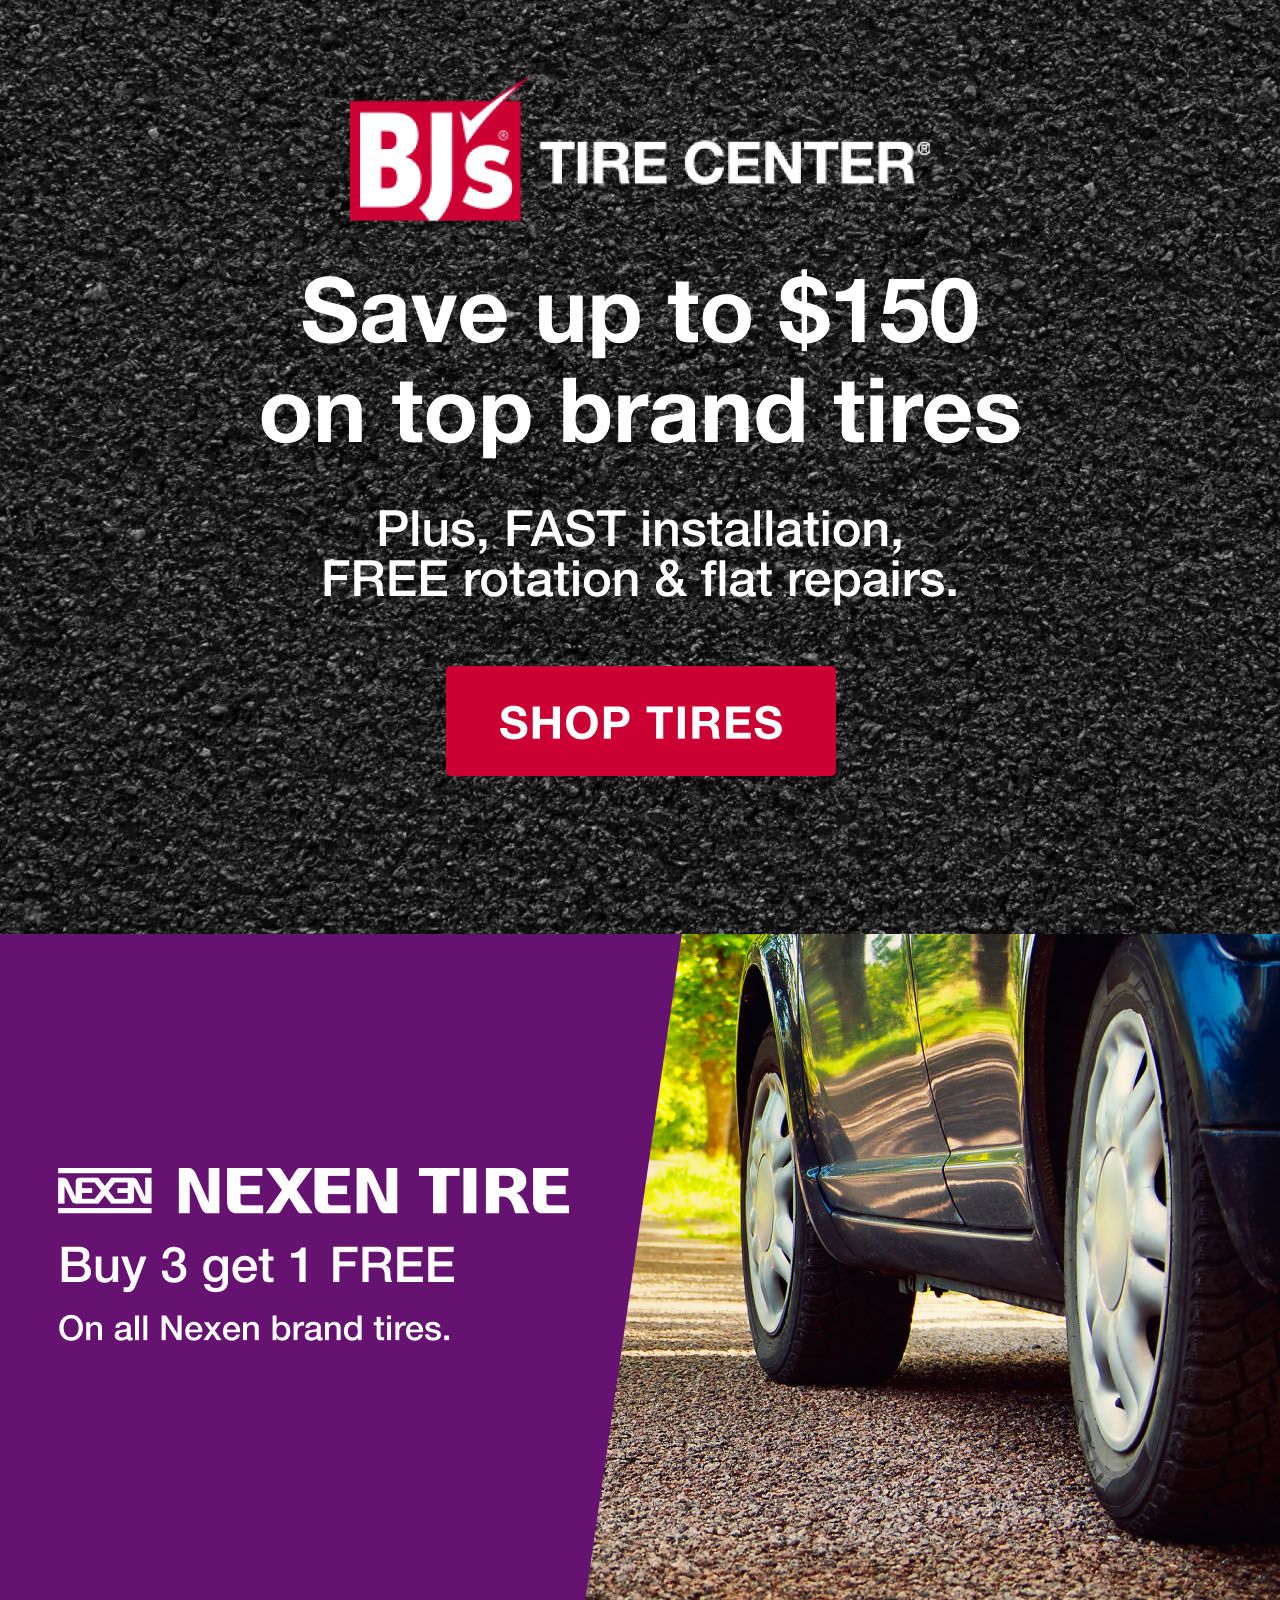 BJs Tire Center. Save up to $150 on top brand tires. Plus, fast installation, free rotation & flat repairs. Click to shop tires.